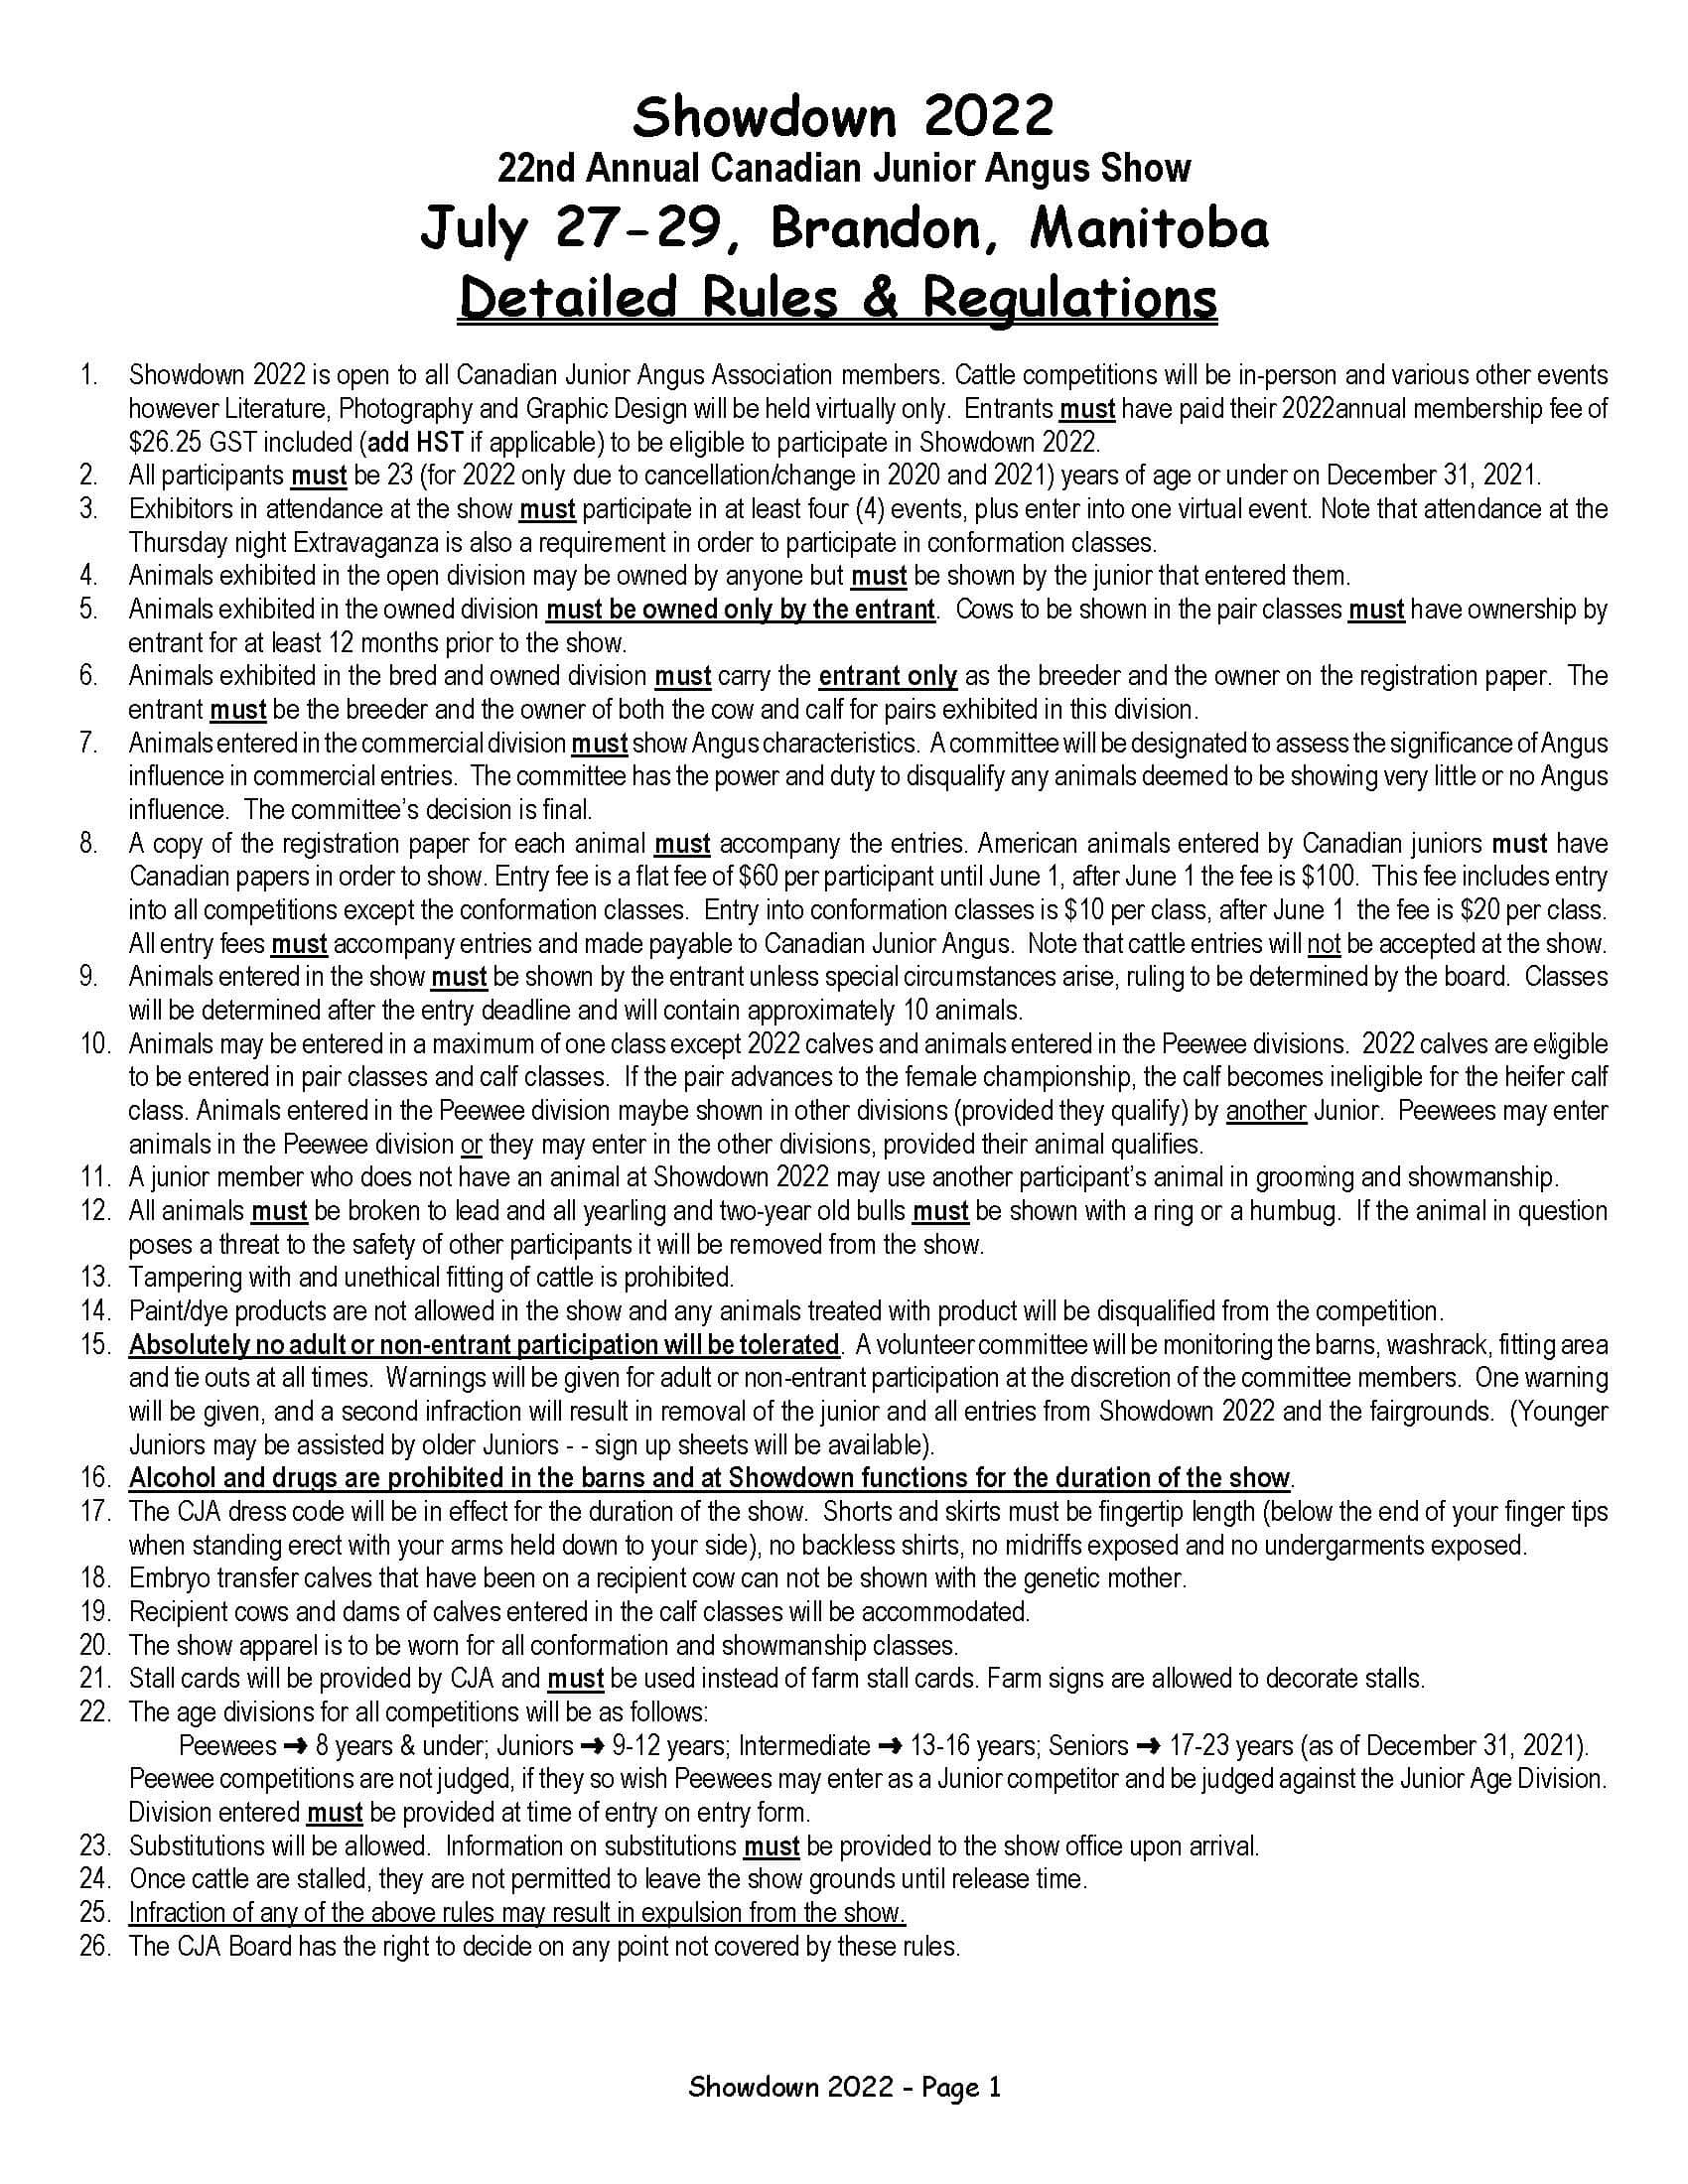 Rules Regulations (Detailed) 2022_Page_1